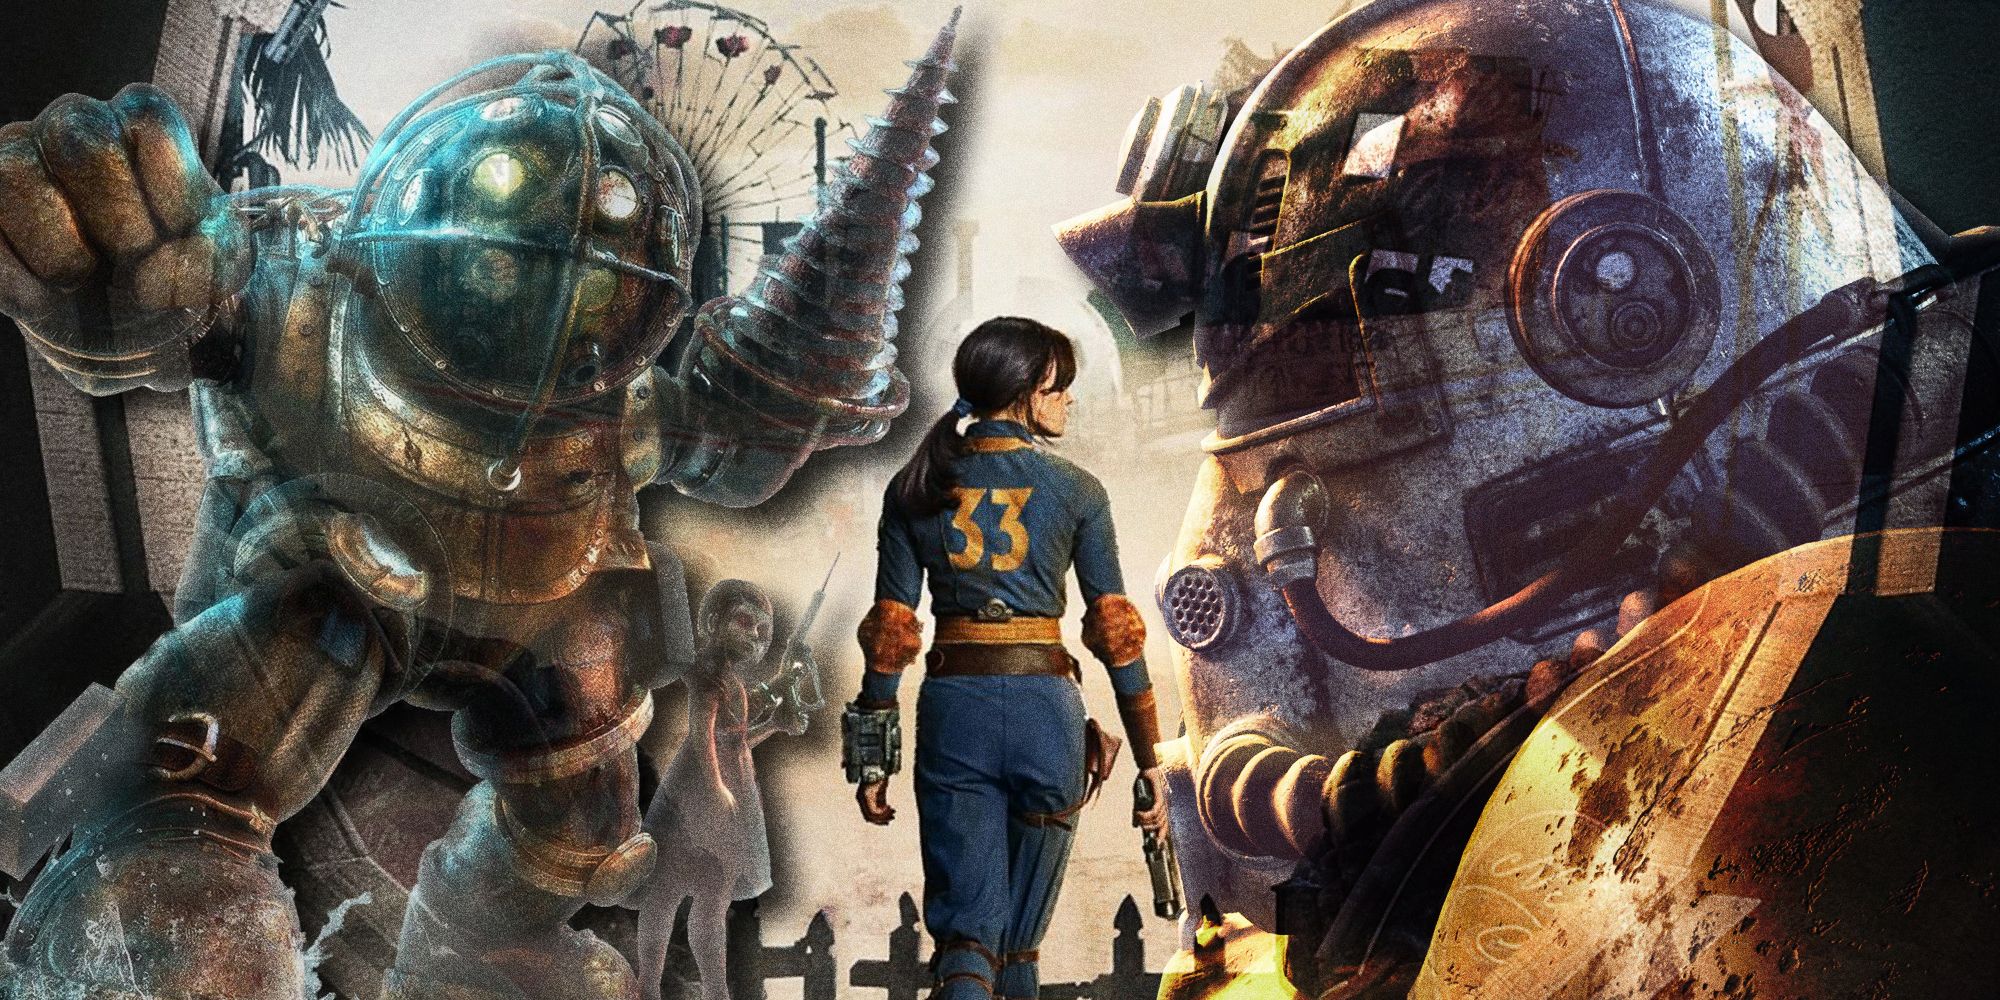 Collage image with the Big Daddy from BioShock on the left, a Power Armor helmet from Fallout on the right, and  Ellla Purnell's Jean from the Fallout series in the middle